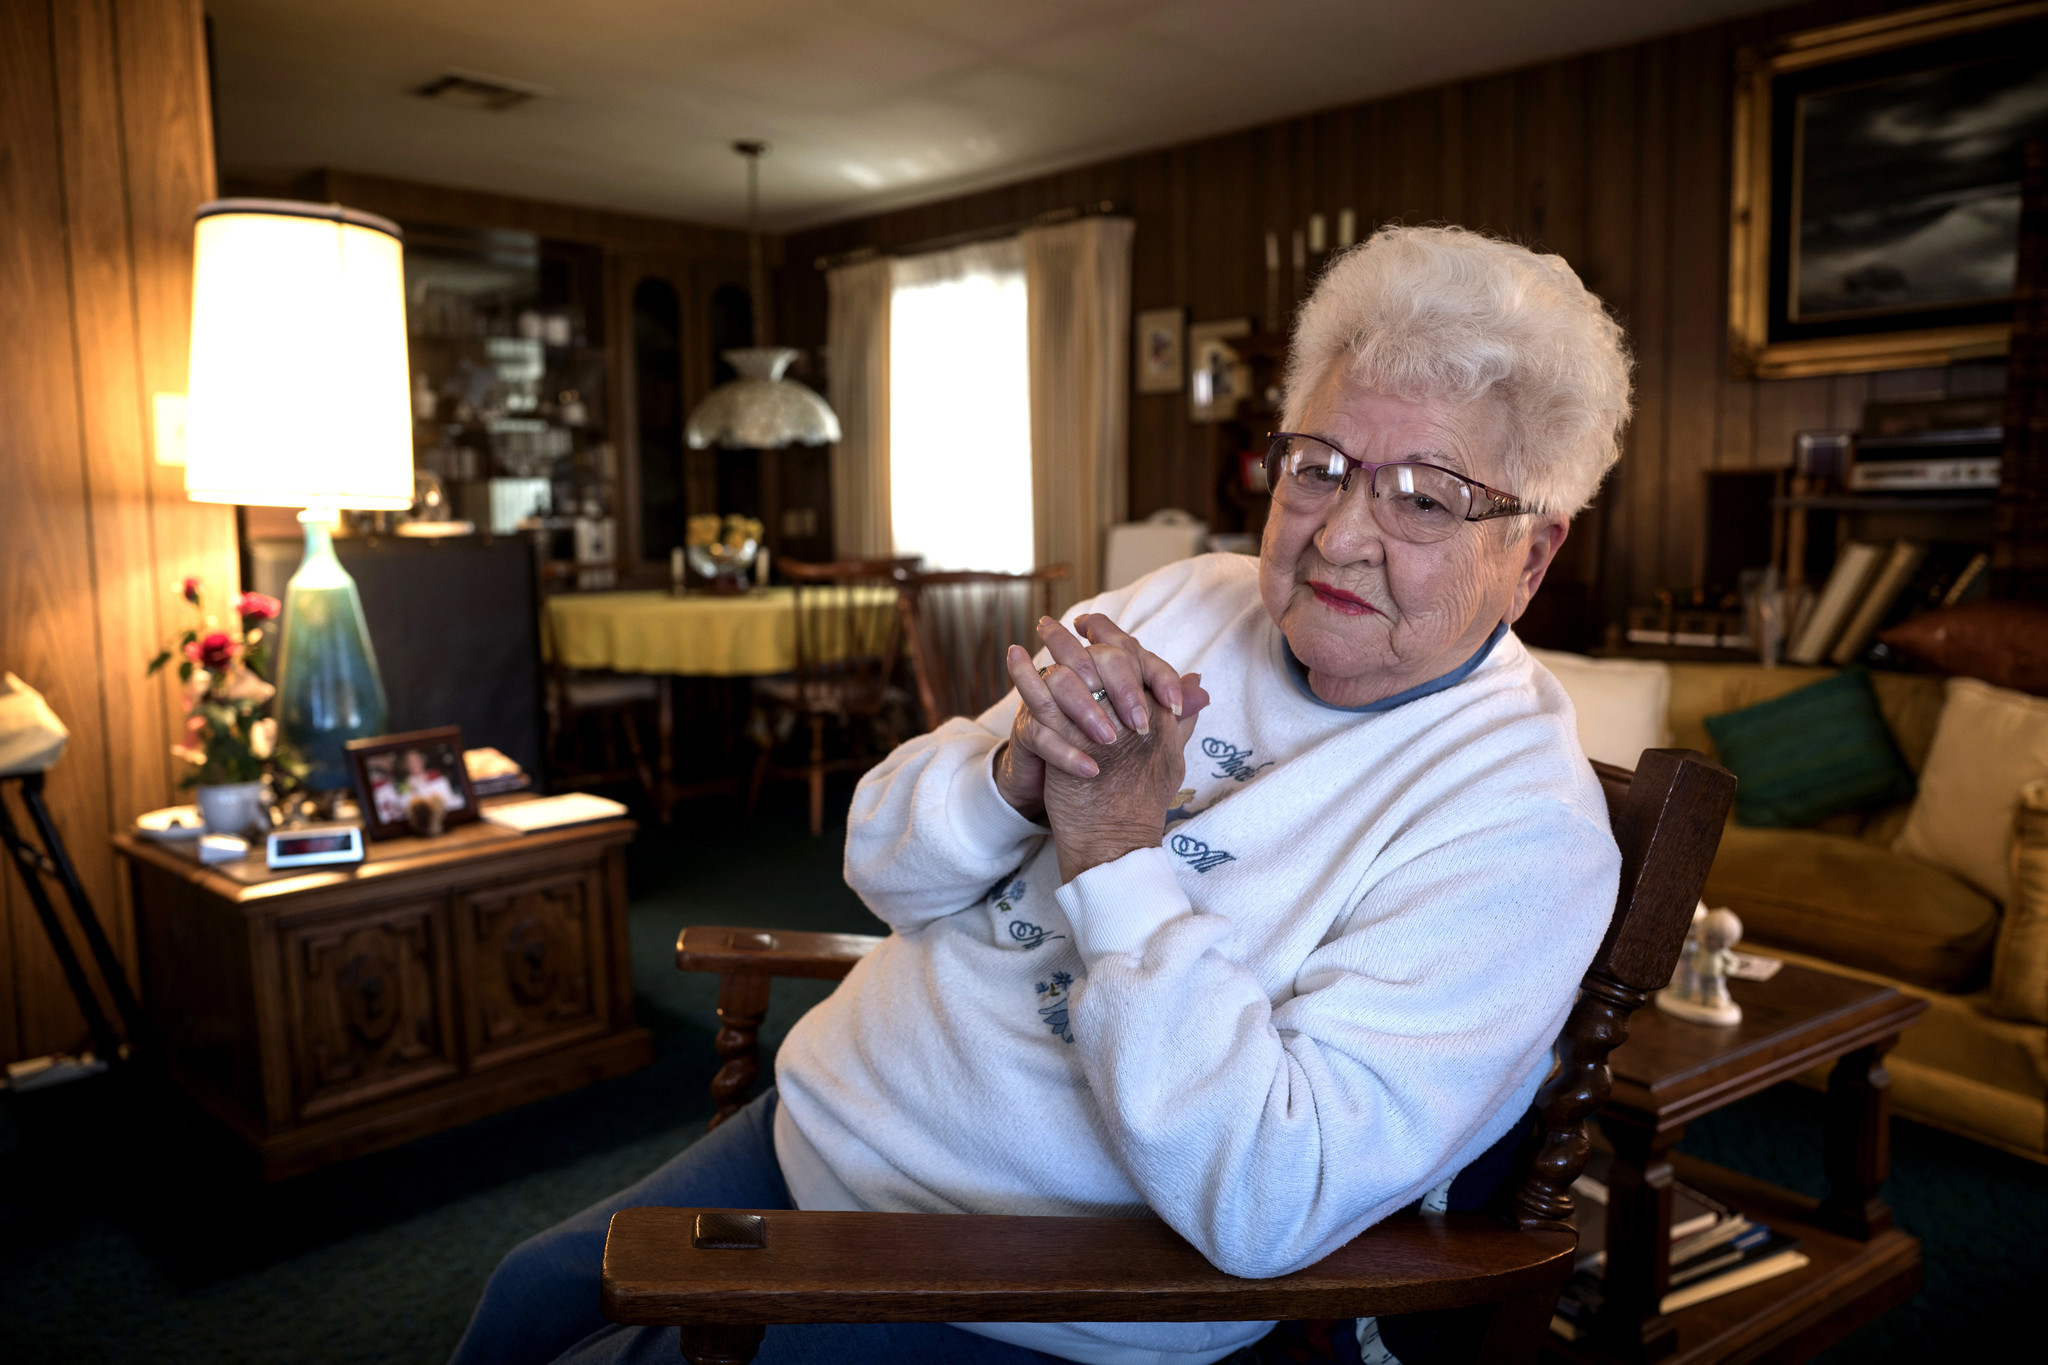 Dorothy "Dot" Niblock at her home at the Plaza del Rey mobile home park. Niblock moved into the park 44 years ago. She designed her two-bedroom home with her late husband.